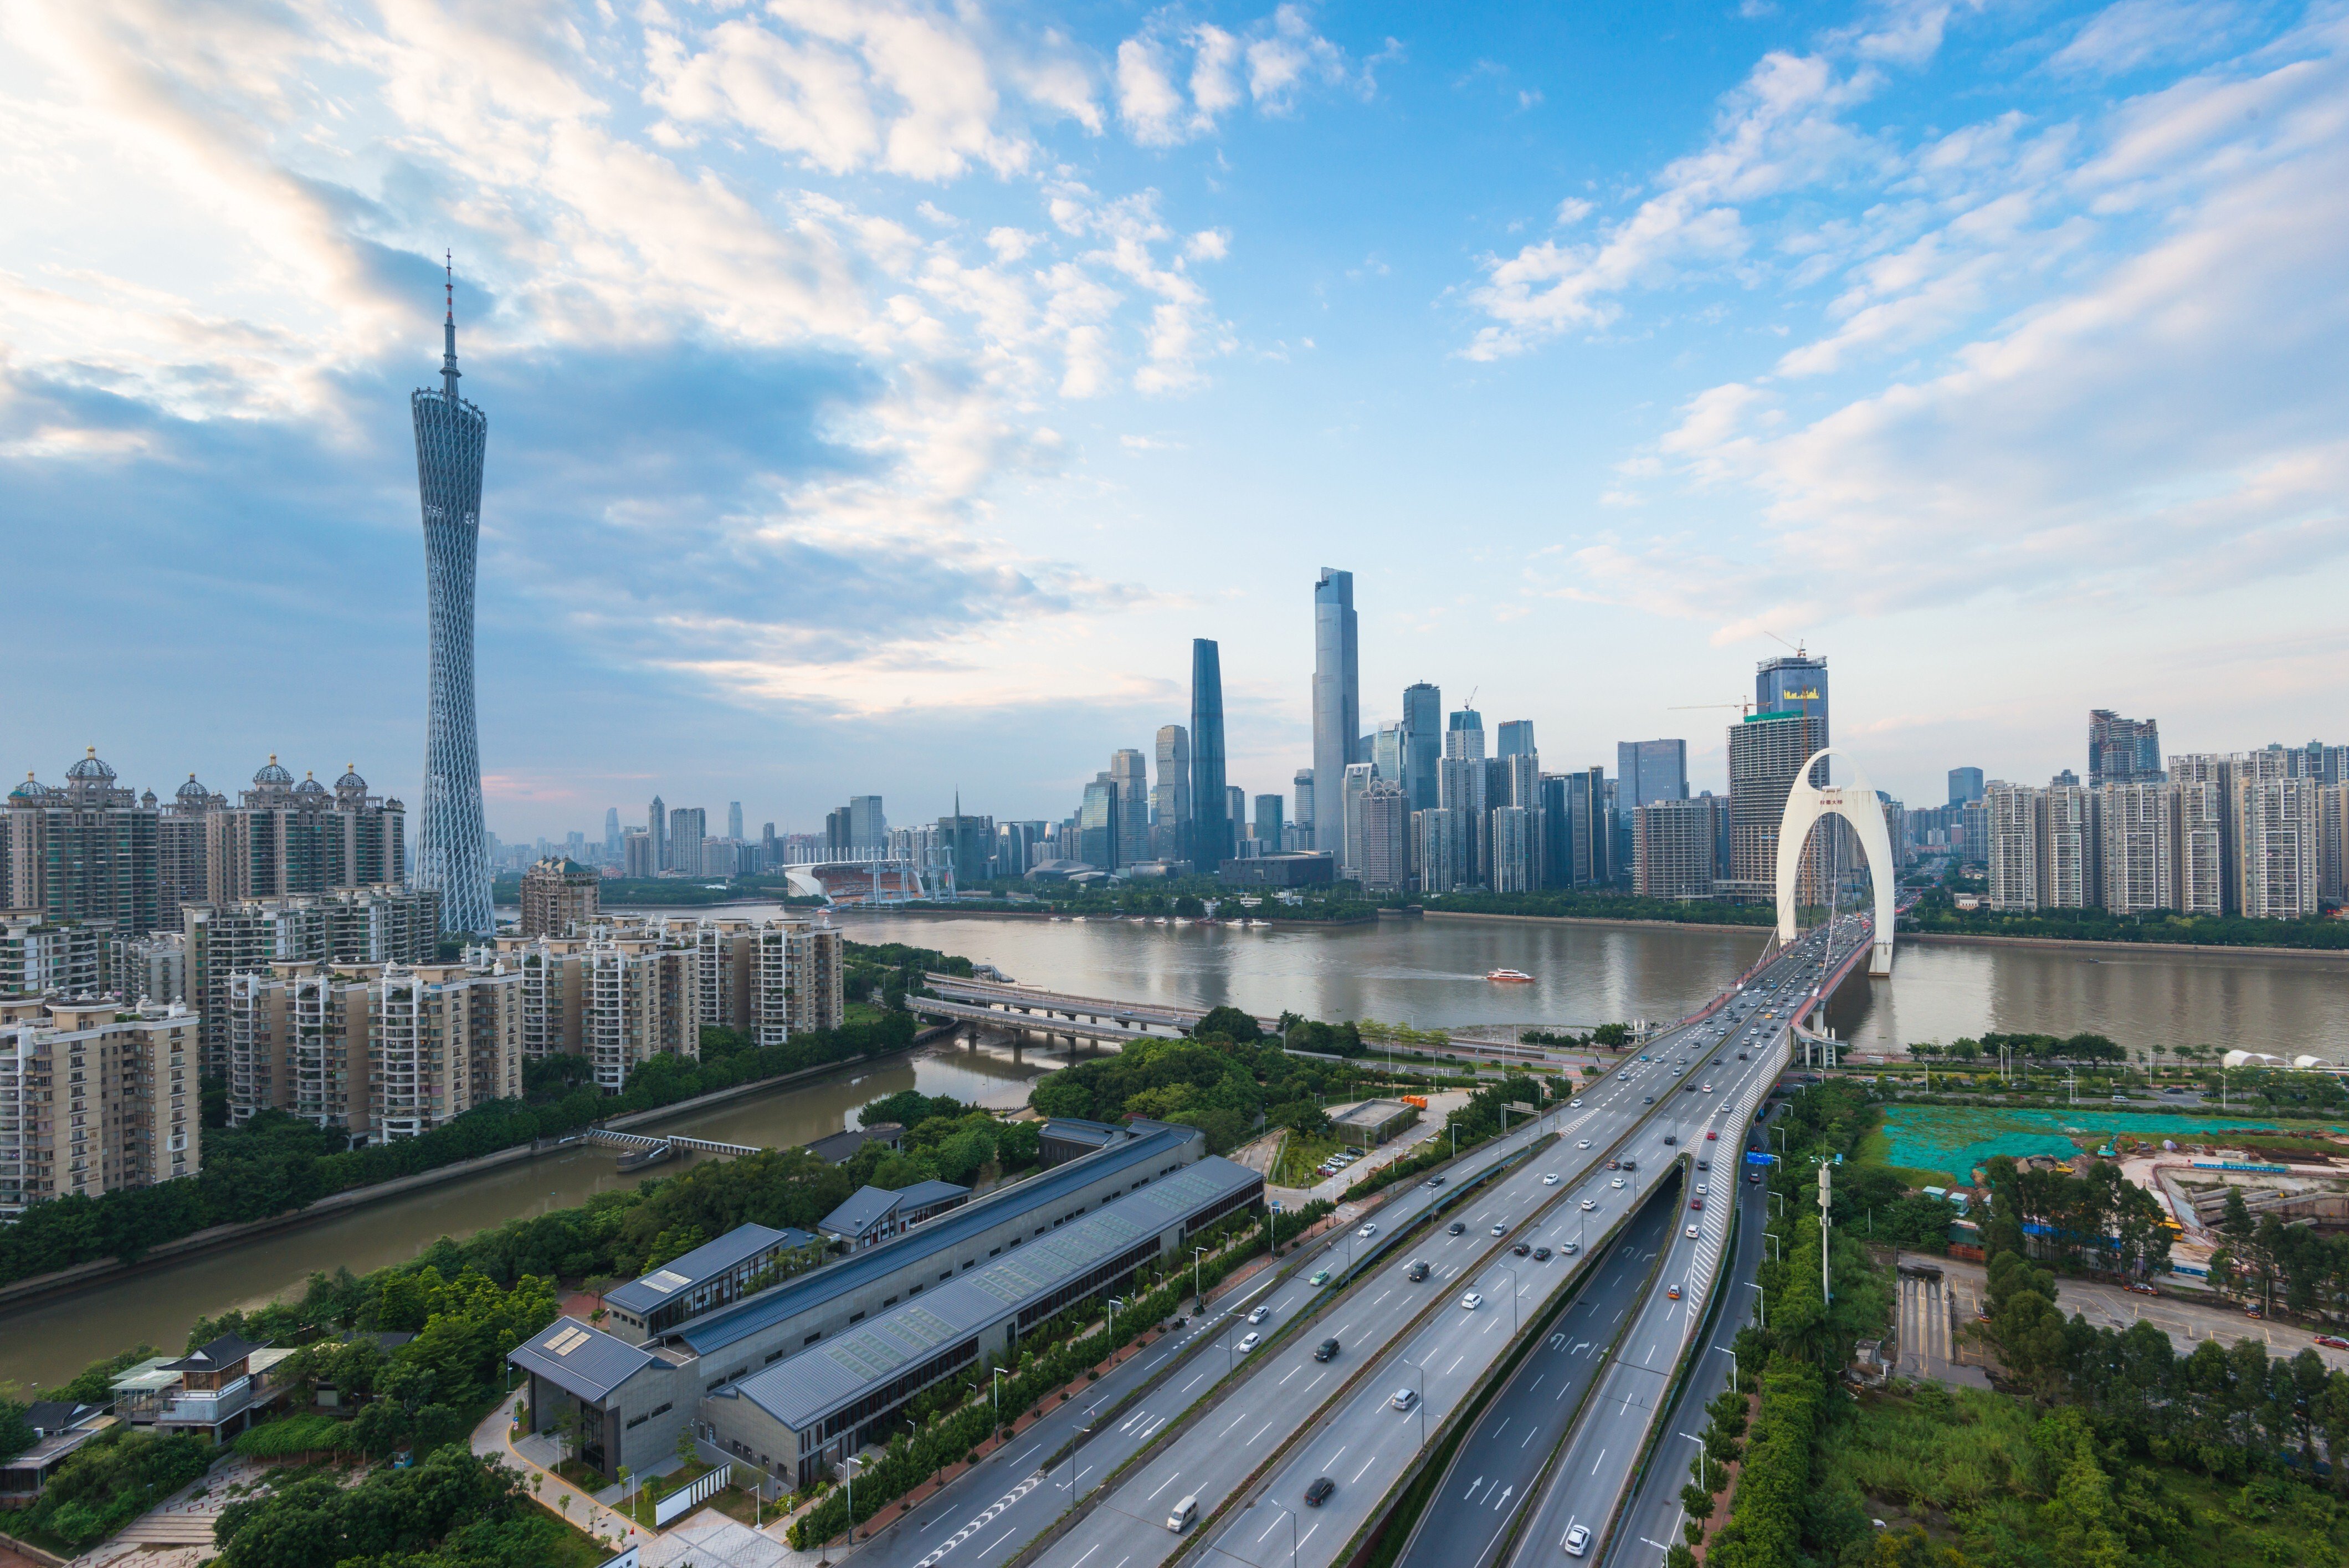 The city is pushing for development, particularly in the areas of innovation, new infrastructure and the digital economy. Photo: Shutterstock.